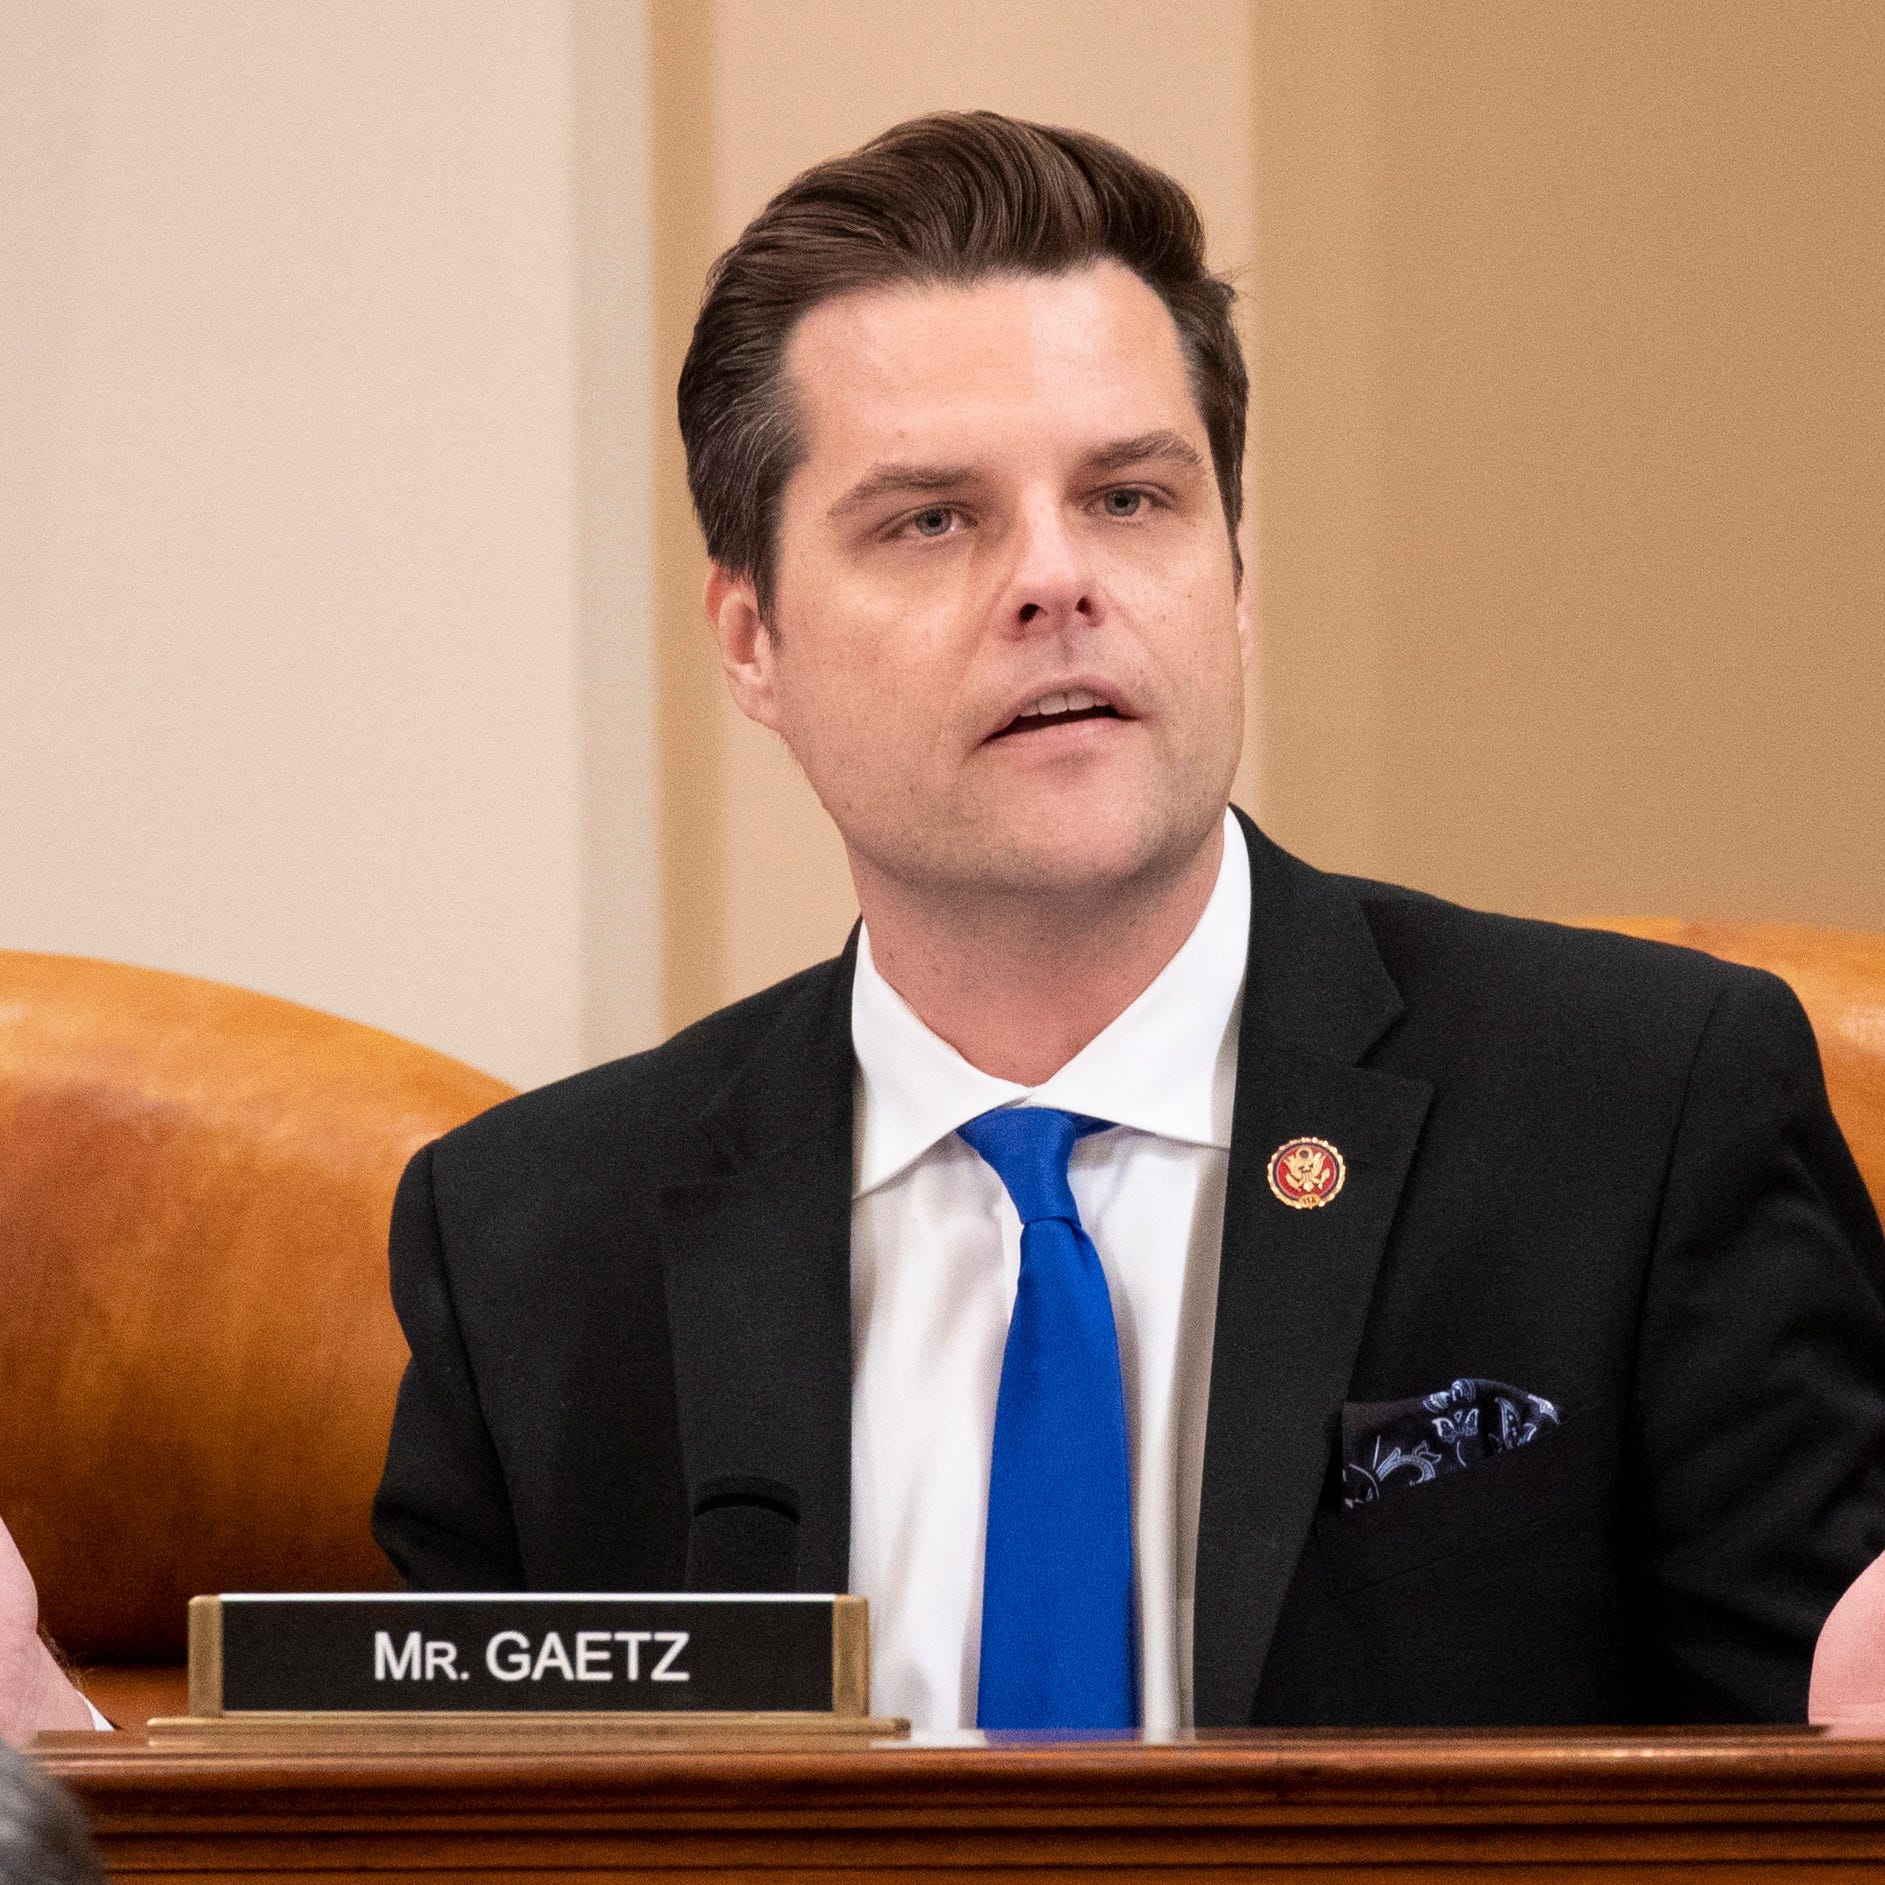 epa08066291 Republican Representative from Florida Matt Gaetz speaks during the House Judiciary Committee's markup of House Resolution 755, Articles of Impeachment Against President Donald J. Trump, on Capitol Hill in Washington, DC, USA, 12 December 2019. The House Judiciary Committee has written two articles of impeachment accusing US President Donald J. Trump of abuse of power and obstruction of Congress. The committee is expected to vote on the two articles, 12 December, setting up a vote on the House floor next week. EPA-EFE/MICHAEL REYNOLDS ORG XMIT: MRX01